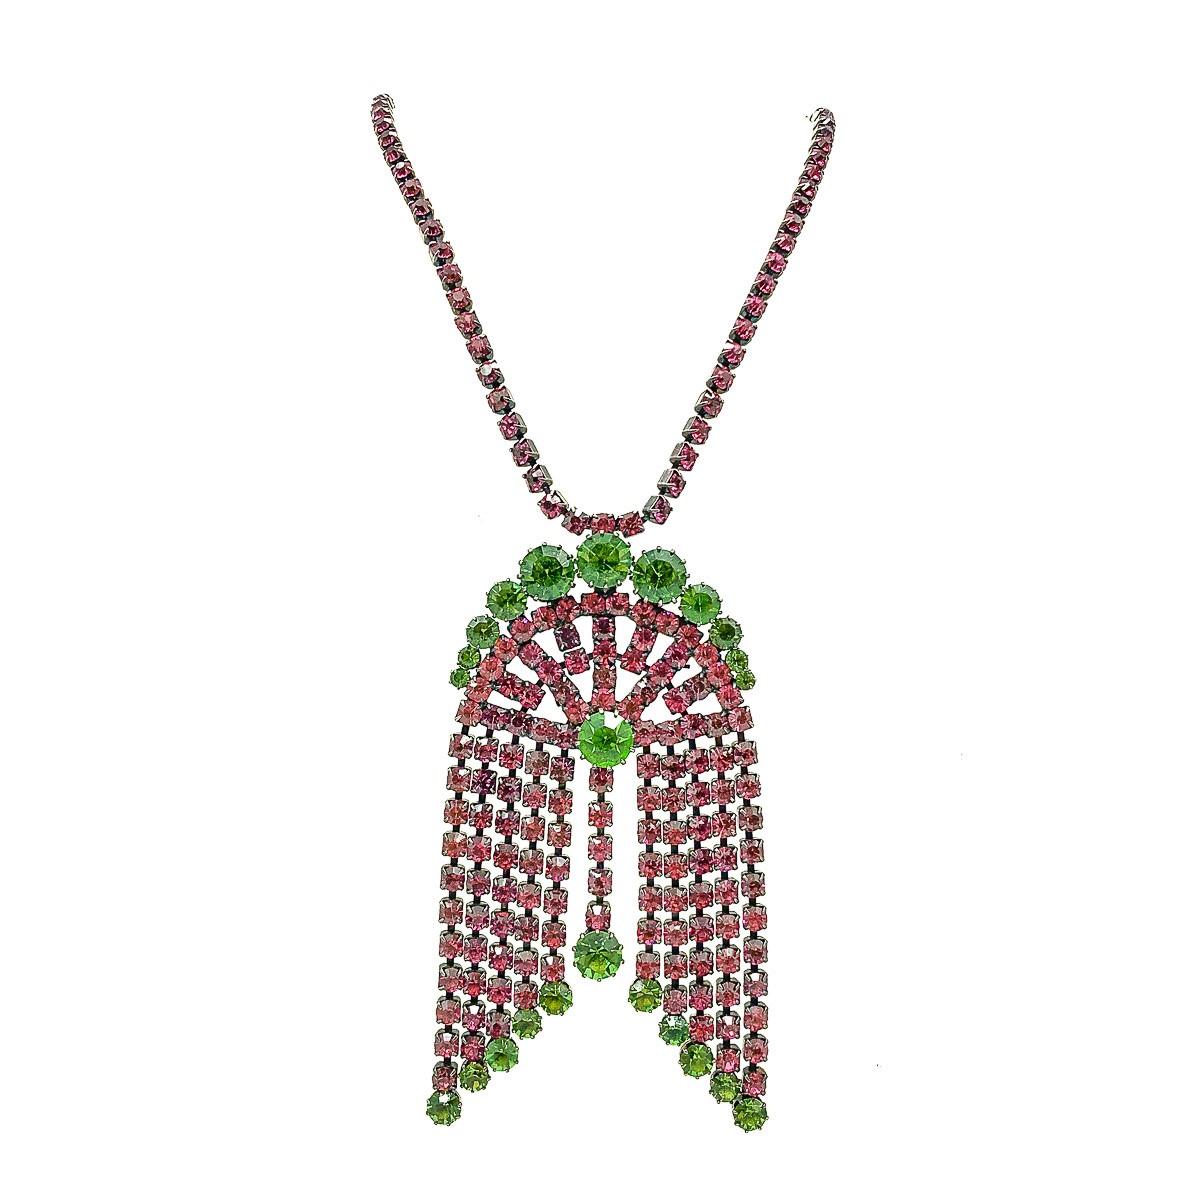 A Vintage Crystal Tassel Necklace. Featuring a stunning, contrasting combination of pink and green crystals, each individually set within an Art Deco inspired arched tassel design.  The impressive pendant suspended from an end to end chain, or